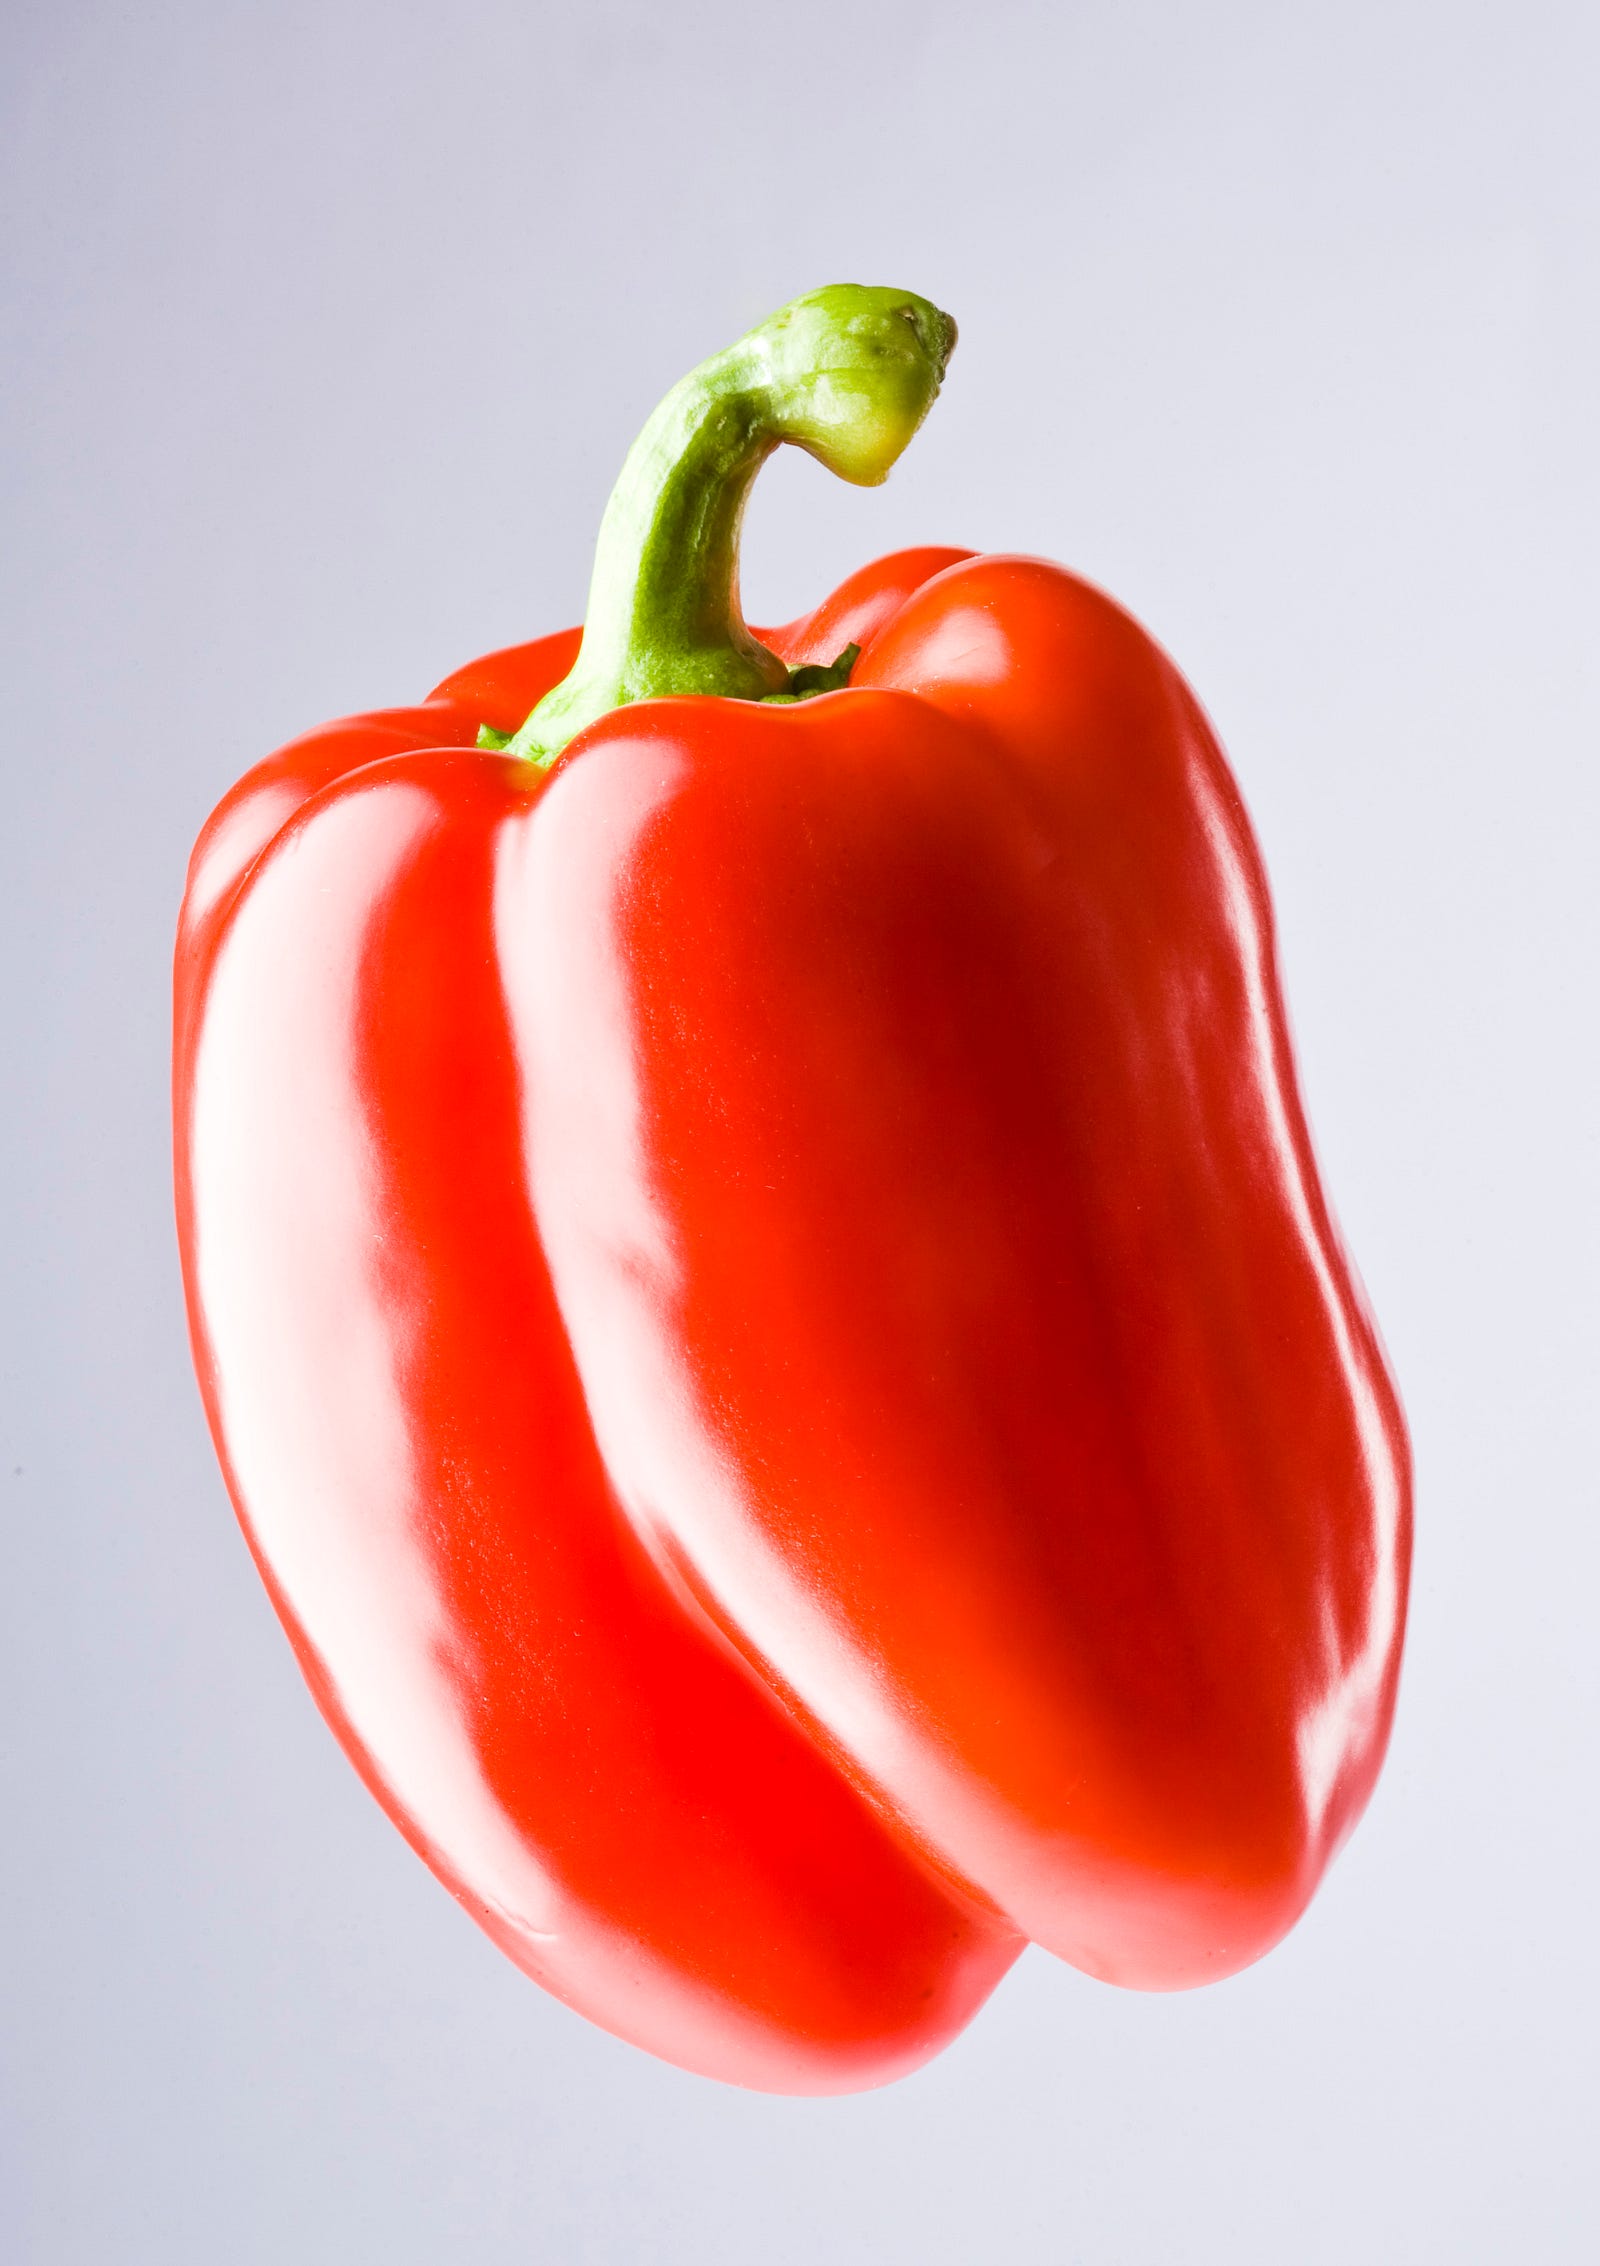 A red bell pepper. Nourishment is another crucial element of Blue Zone morning rituals. These communities prioritize a wholesome and plant-based breakfast that provides essential nutrients to fuel their bodies. You can optimize your nutrition and energy levels by starting your day with a nourishing meal packed with fruits, vegetables, whole grains, and legumes.